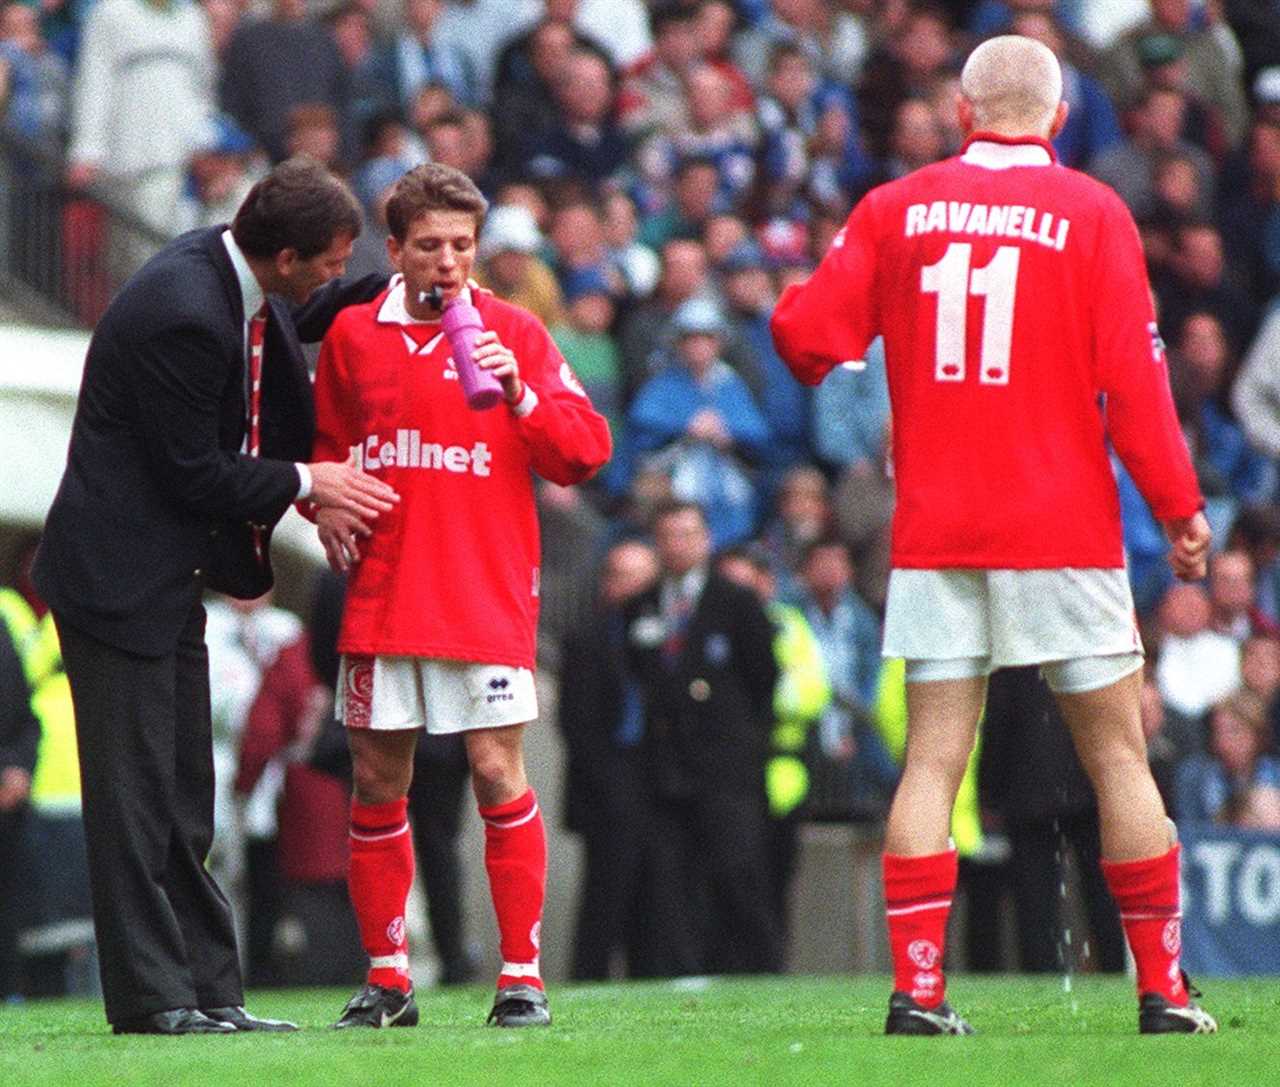 Bryan Robson calls for stricter Covid postponement rules as he recalls virus hell that saw his Middlesbrough relegated